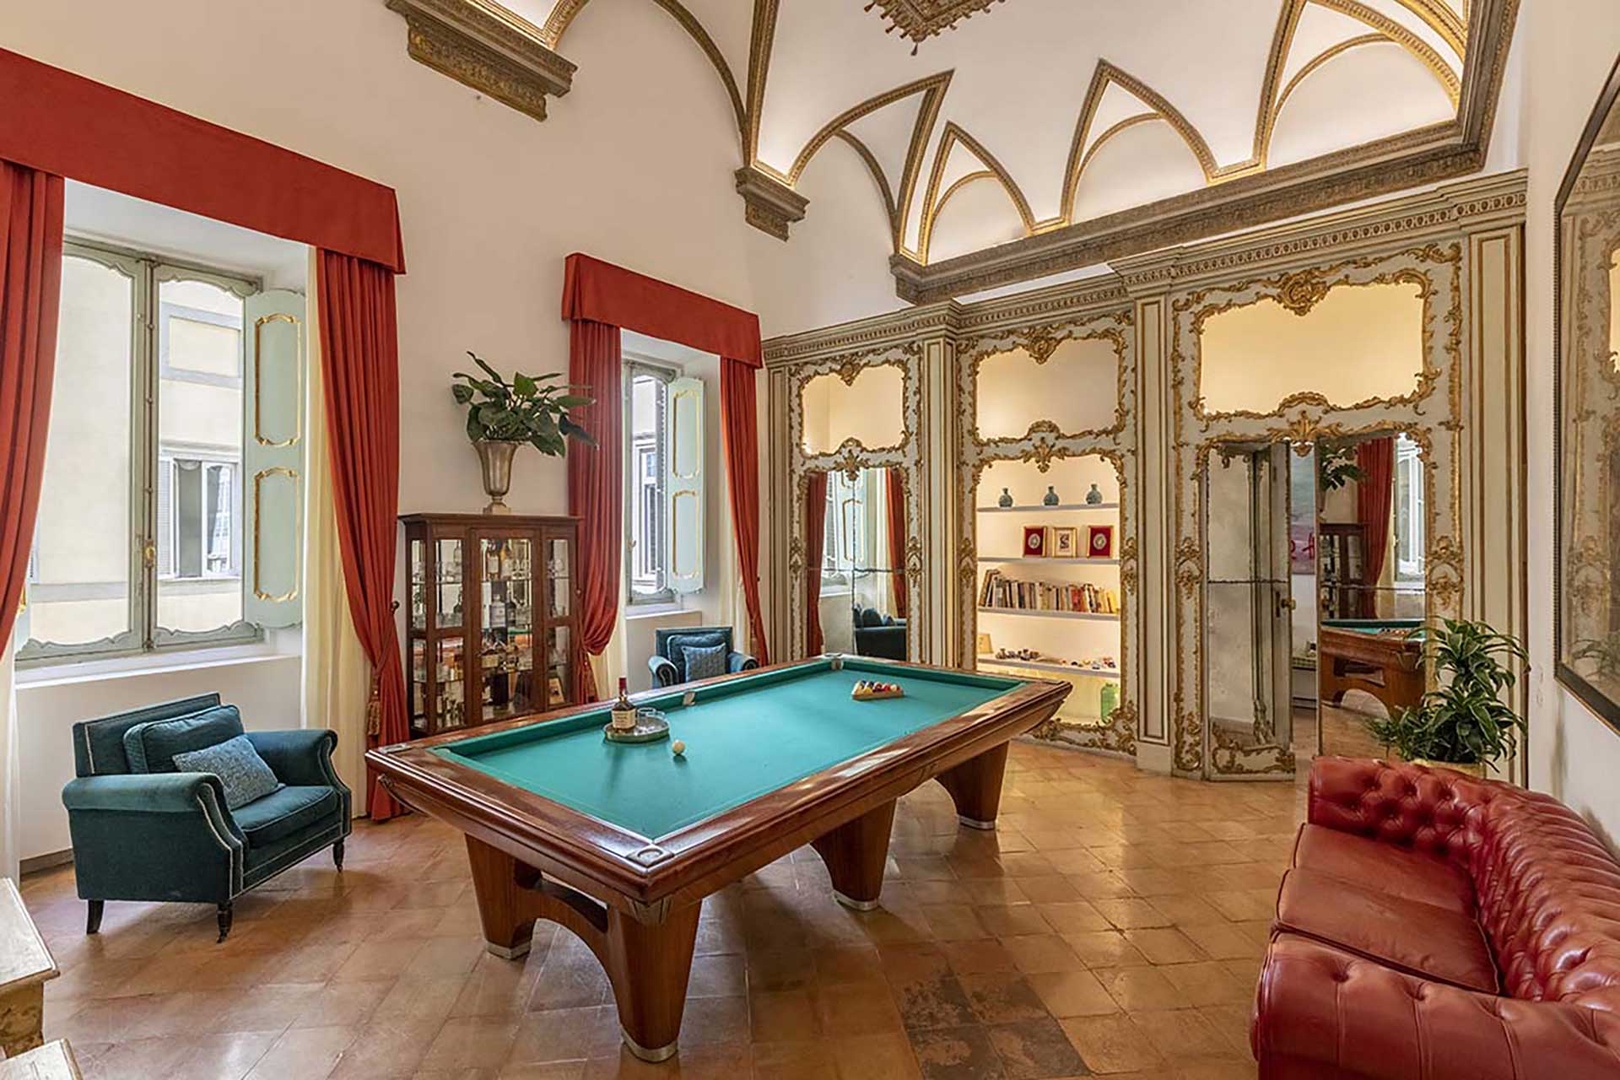 A billiard room adds to the enjoyment of your stay.